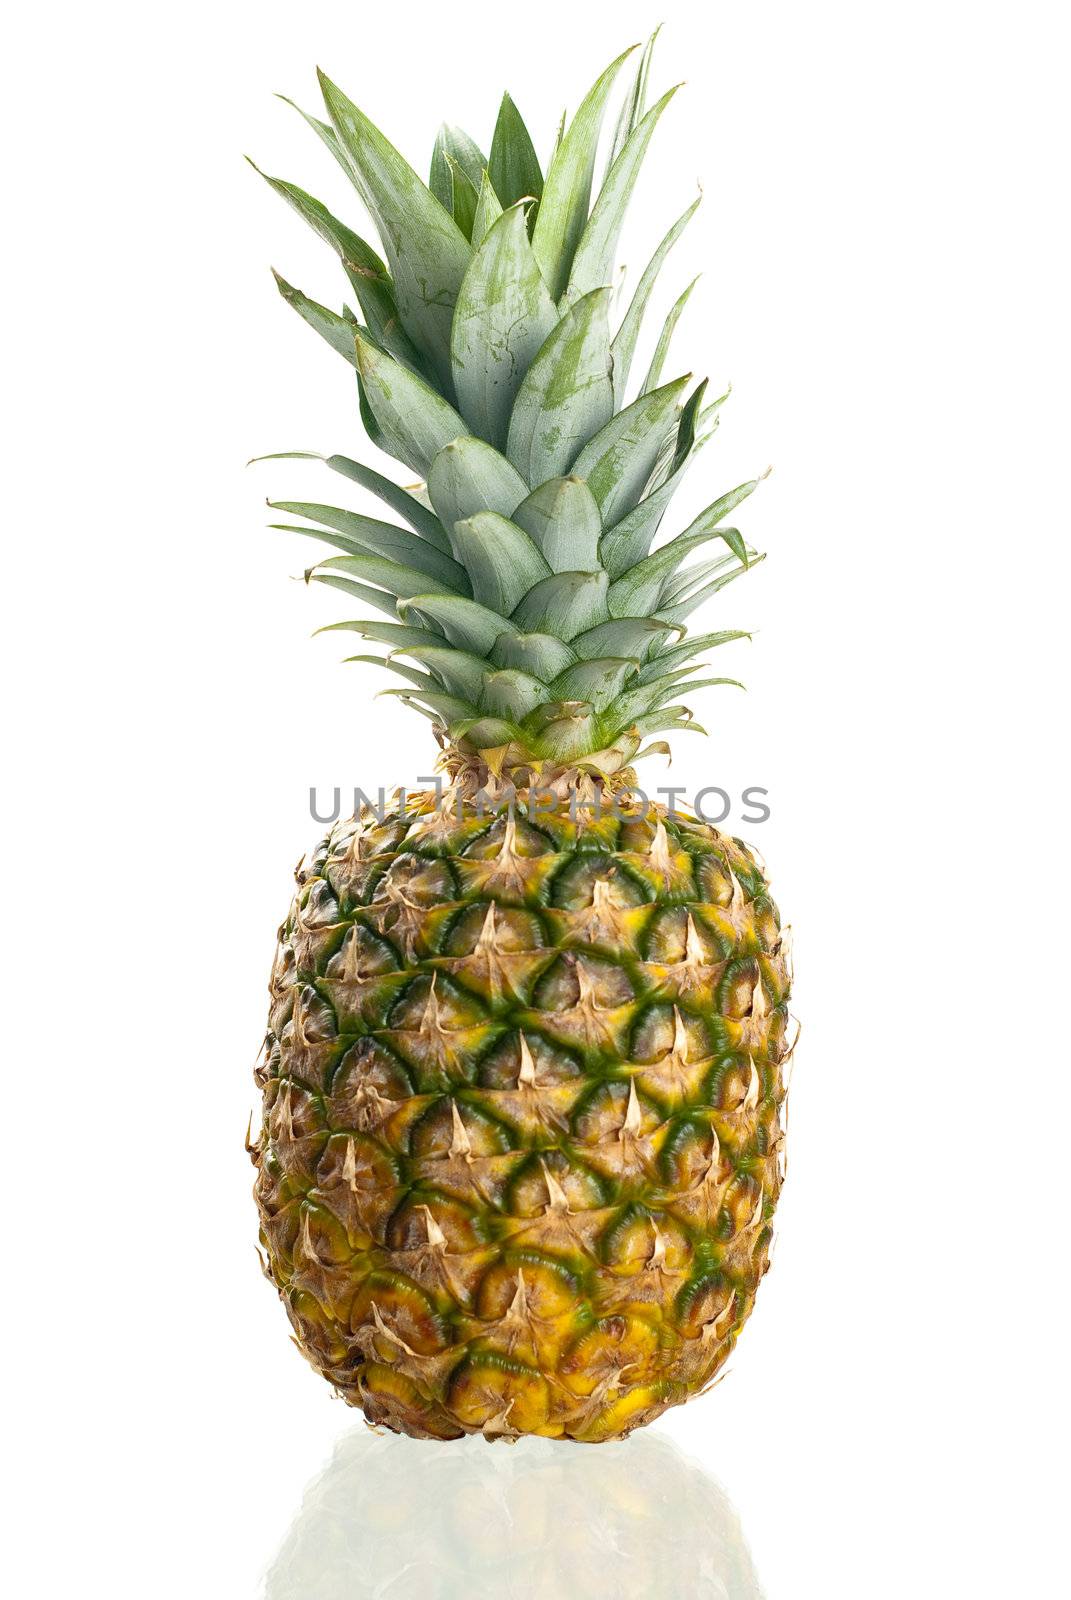 Pineapple isolated on white standing on a reflective surface.